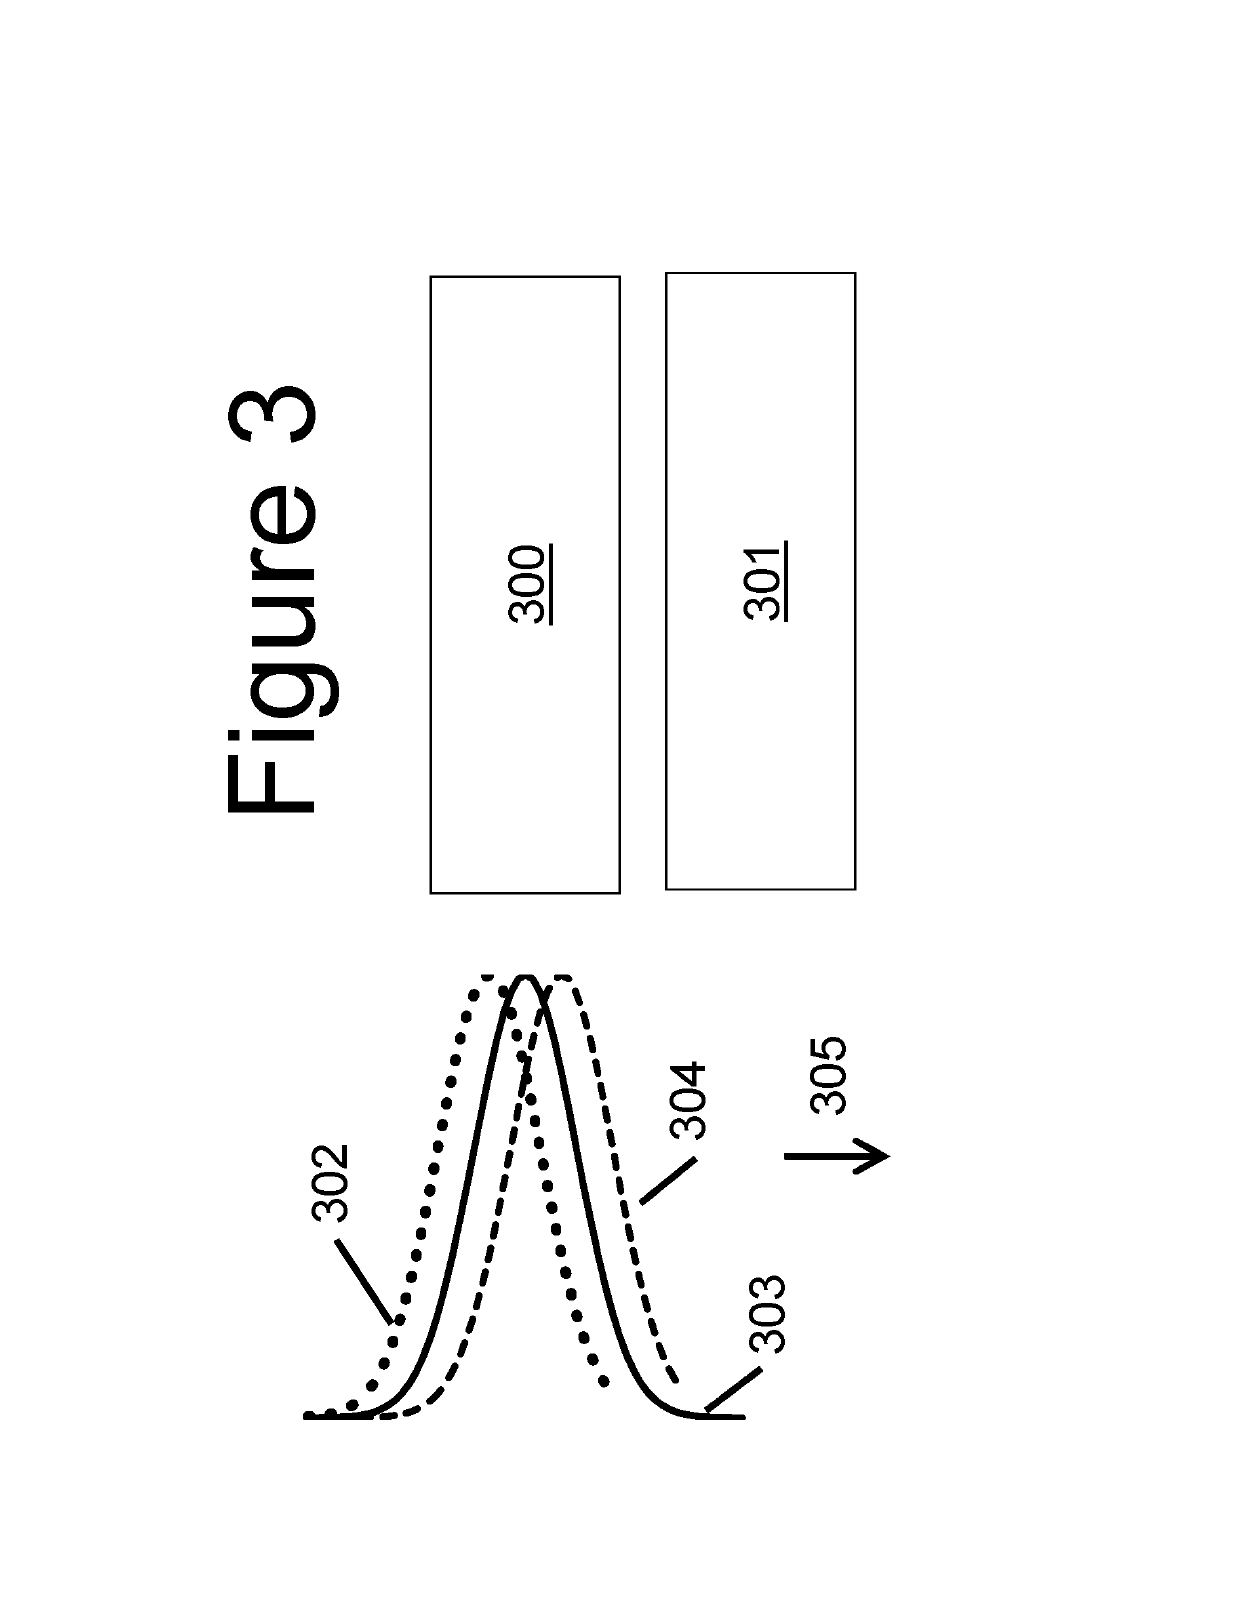 Optical device and methods